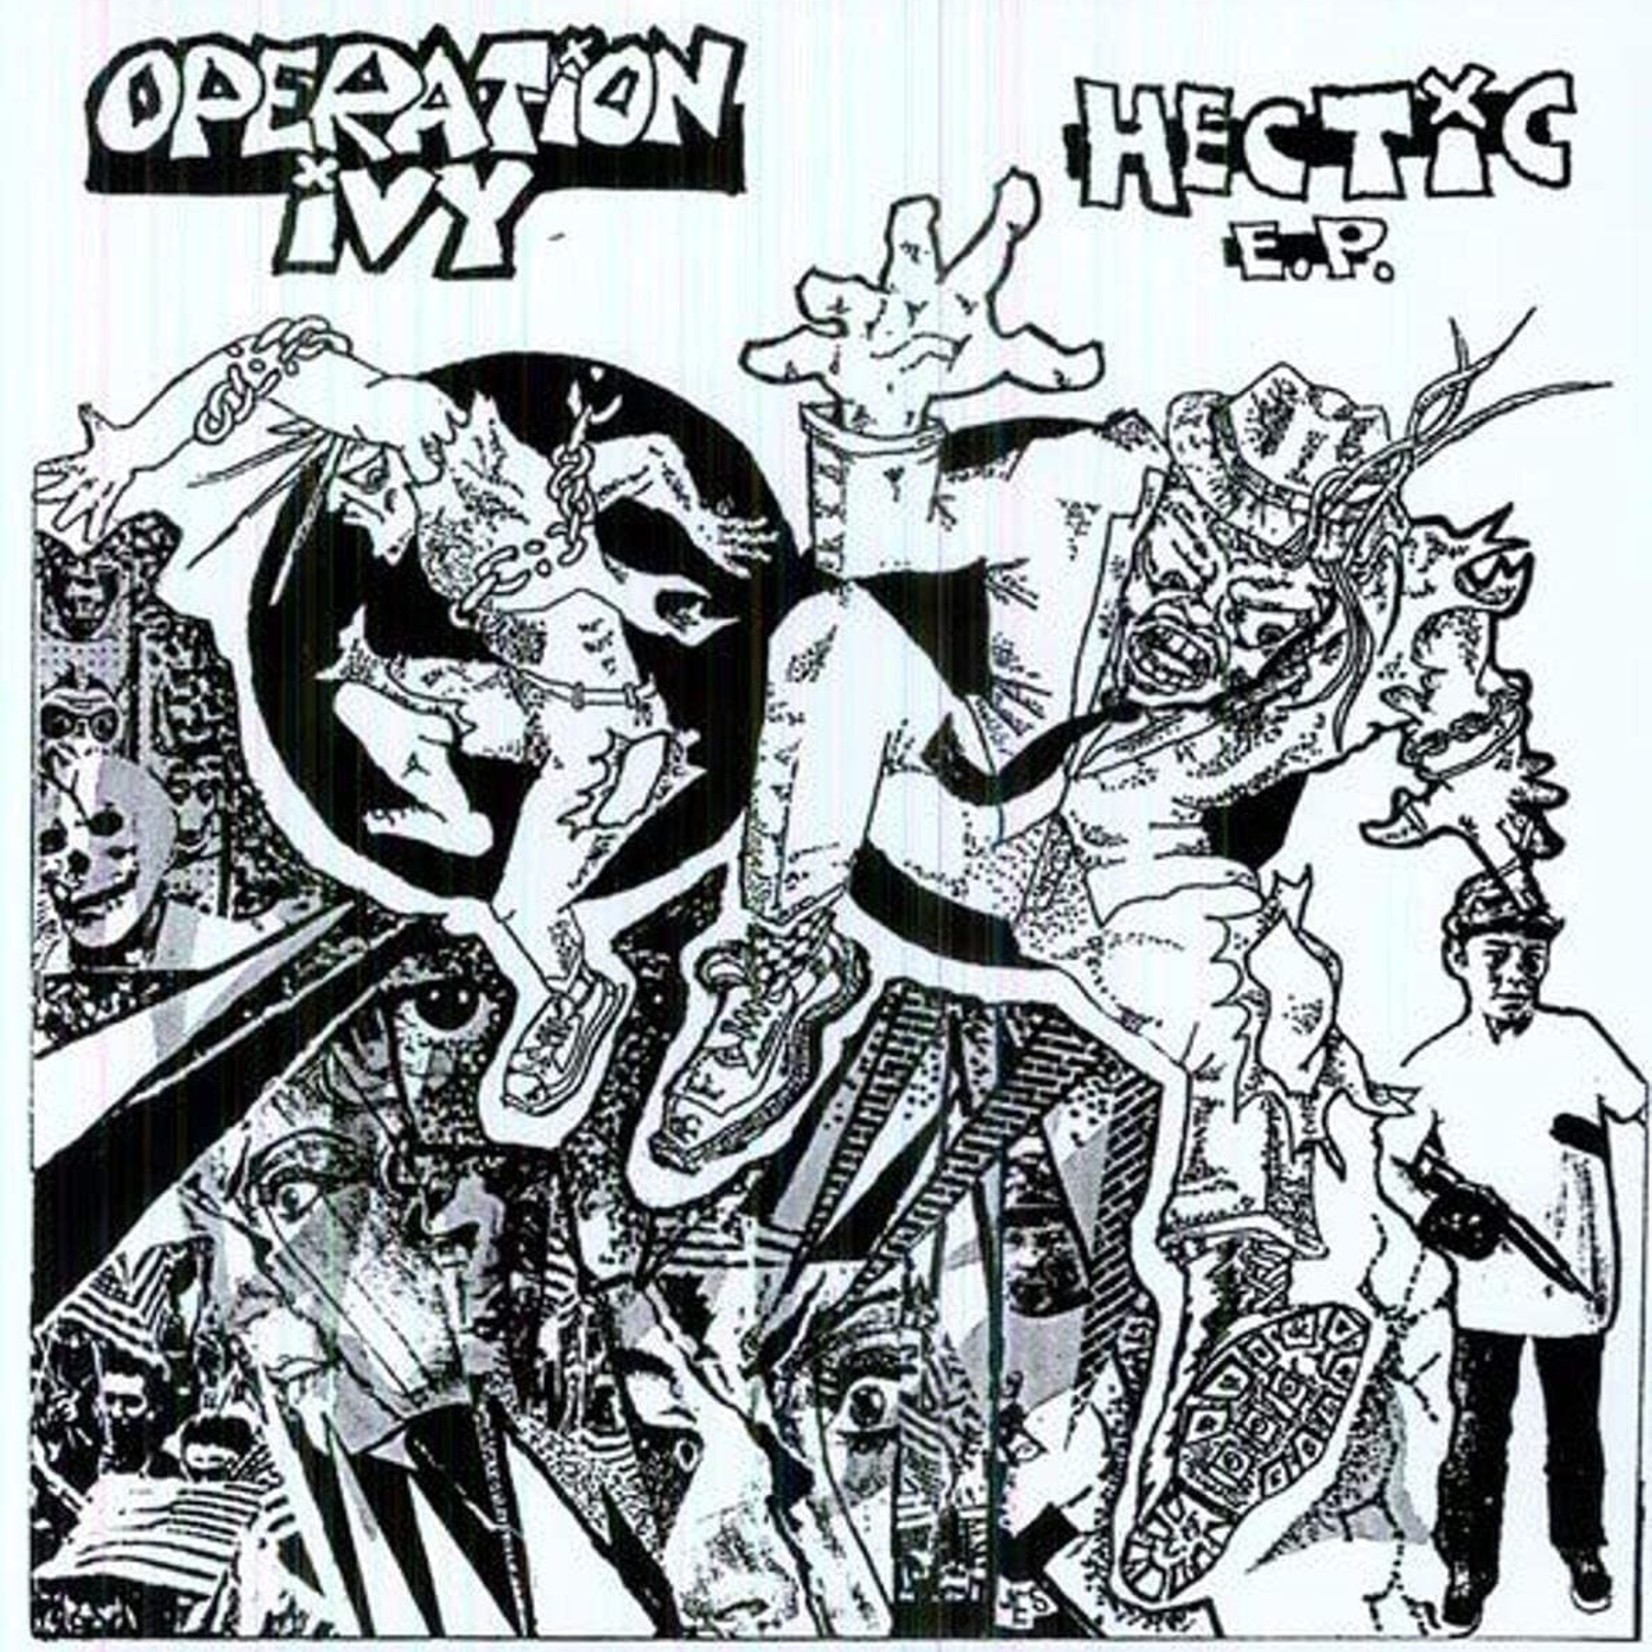 Operation Ivy Operation Ivy - Hectic